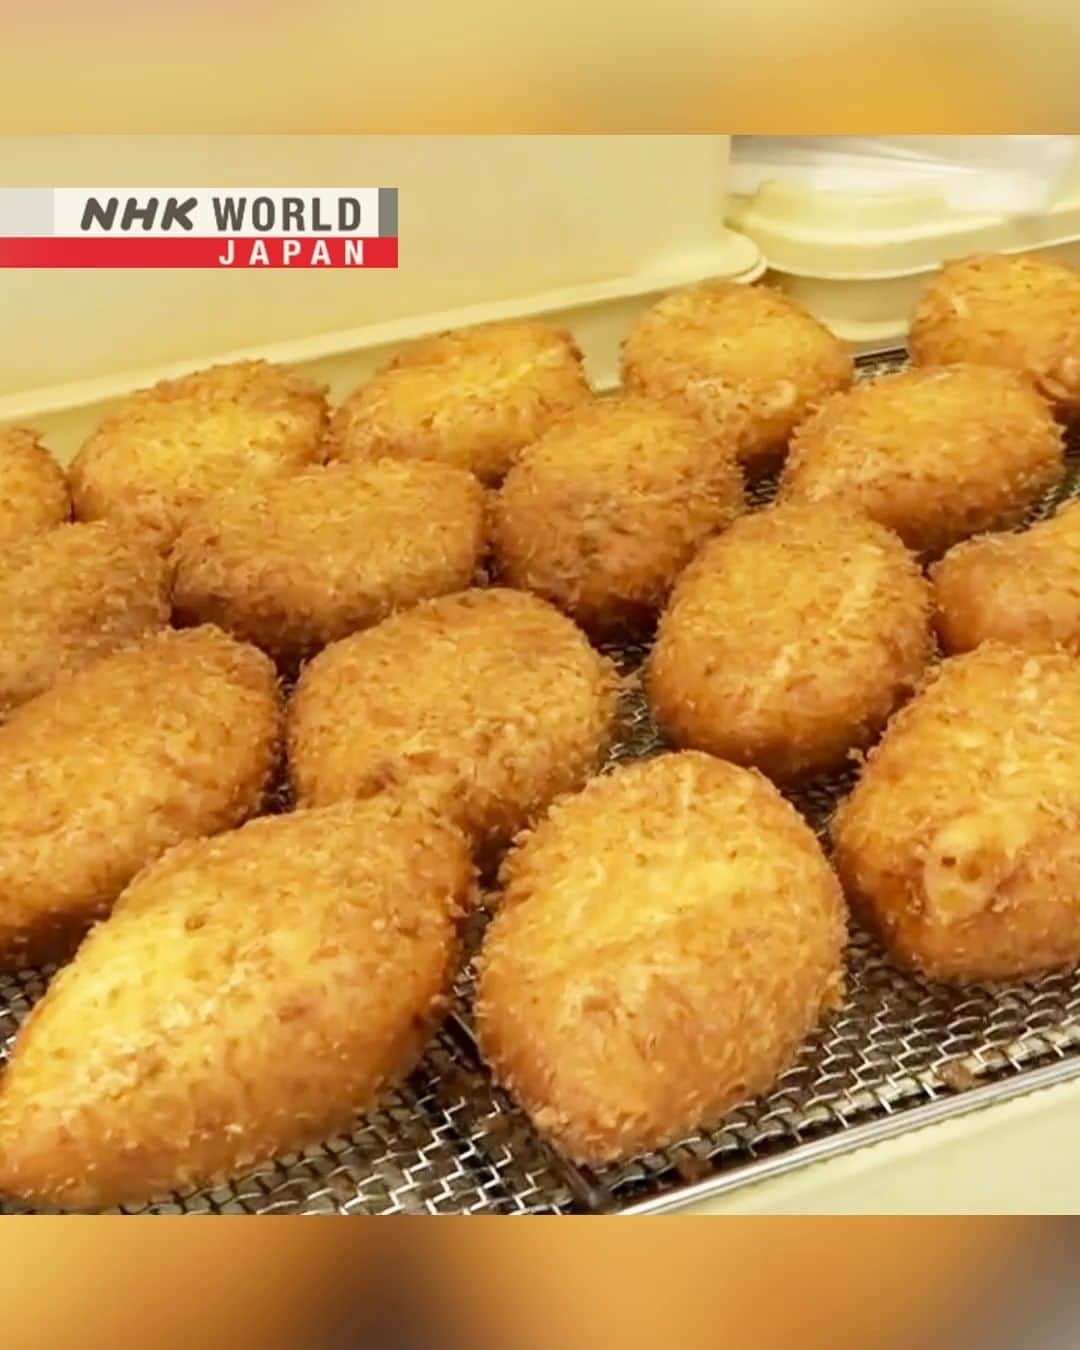 NHK「WORLD-JAPAN」のインスタグラム：「Curry came to Japan from England around 150 years ago, with Japanese curry becoming a national favorite.🍛🇯🇵😋  This Tokyo bakery makes 1,000 curry pan a day. 😃 The delicious bread first appeared about a century ago and was inspired by fried pork cutlets and curry which was popular at the time. . 👉Discover the many different types of Japanese curry｜Watch｜Trails to Oishii Tokyo: JAPANESE CURRY｜Free On Demand｜NHK WORLD-JAPAN website.👀 . 👉Tap in Stories/Highlights to get there.👆 . 👉Follow the link in our bio for more on the latest from Japan. . 👉If we’re on your Favorites list you won’t miss a post. . . #currypan #currybread #currybun #karepan #カレーパン #japanesecurry #japanesebakery #curry #japanesefood #japanesecooking #currystagram #curryroux #curryrice #カレーライス #currylover #japanesecurryrice #kareraisu #japanesecuisine #japanfood #japaneats #tokyo #discovertokyo #nhkworldjapan #japan」